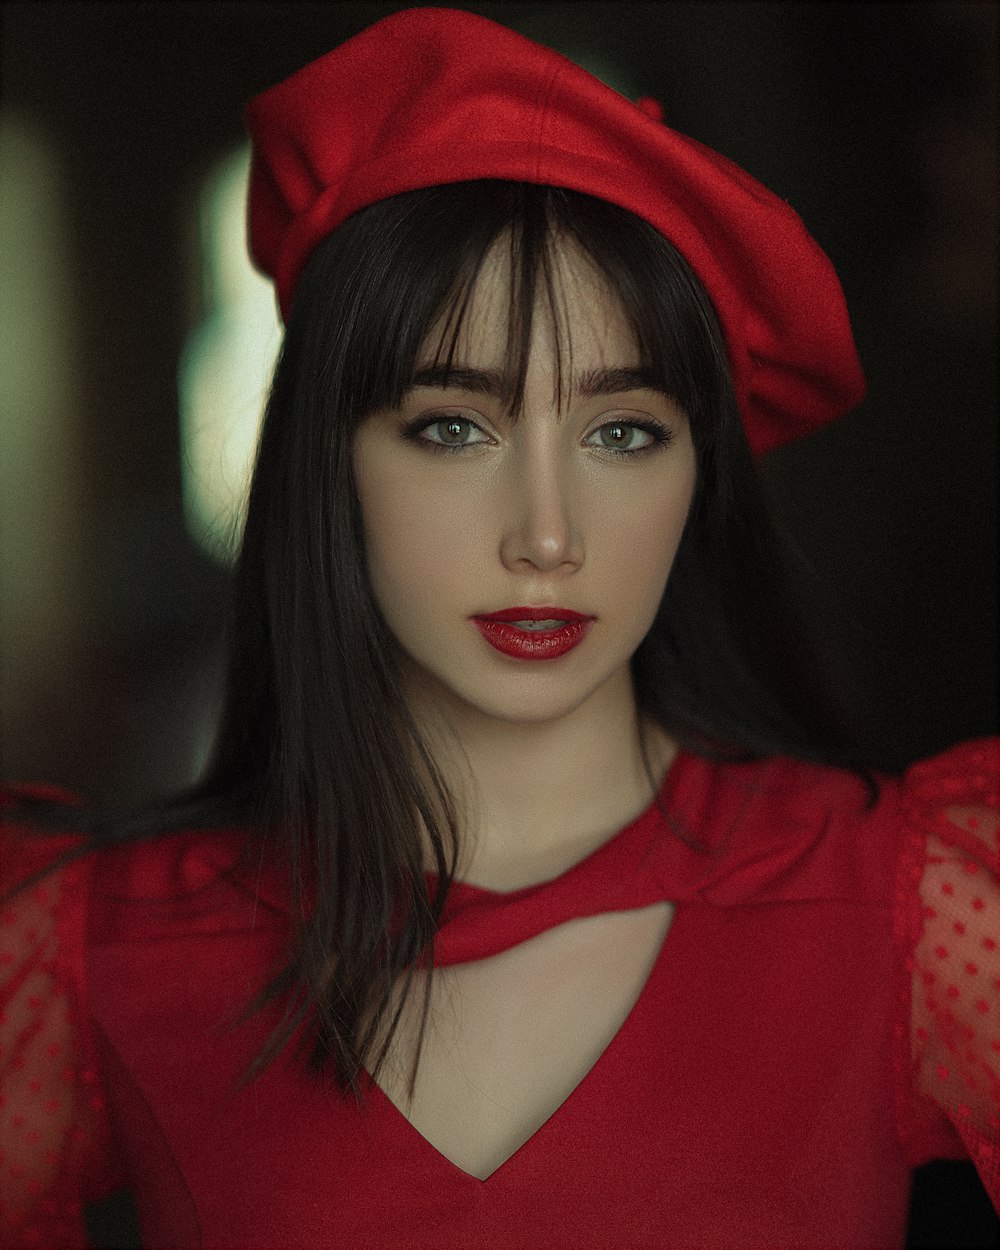 a close up of a person wearing a red hat